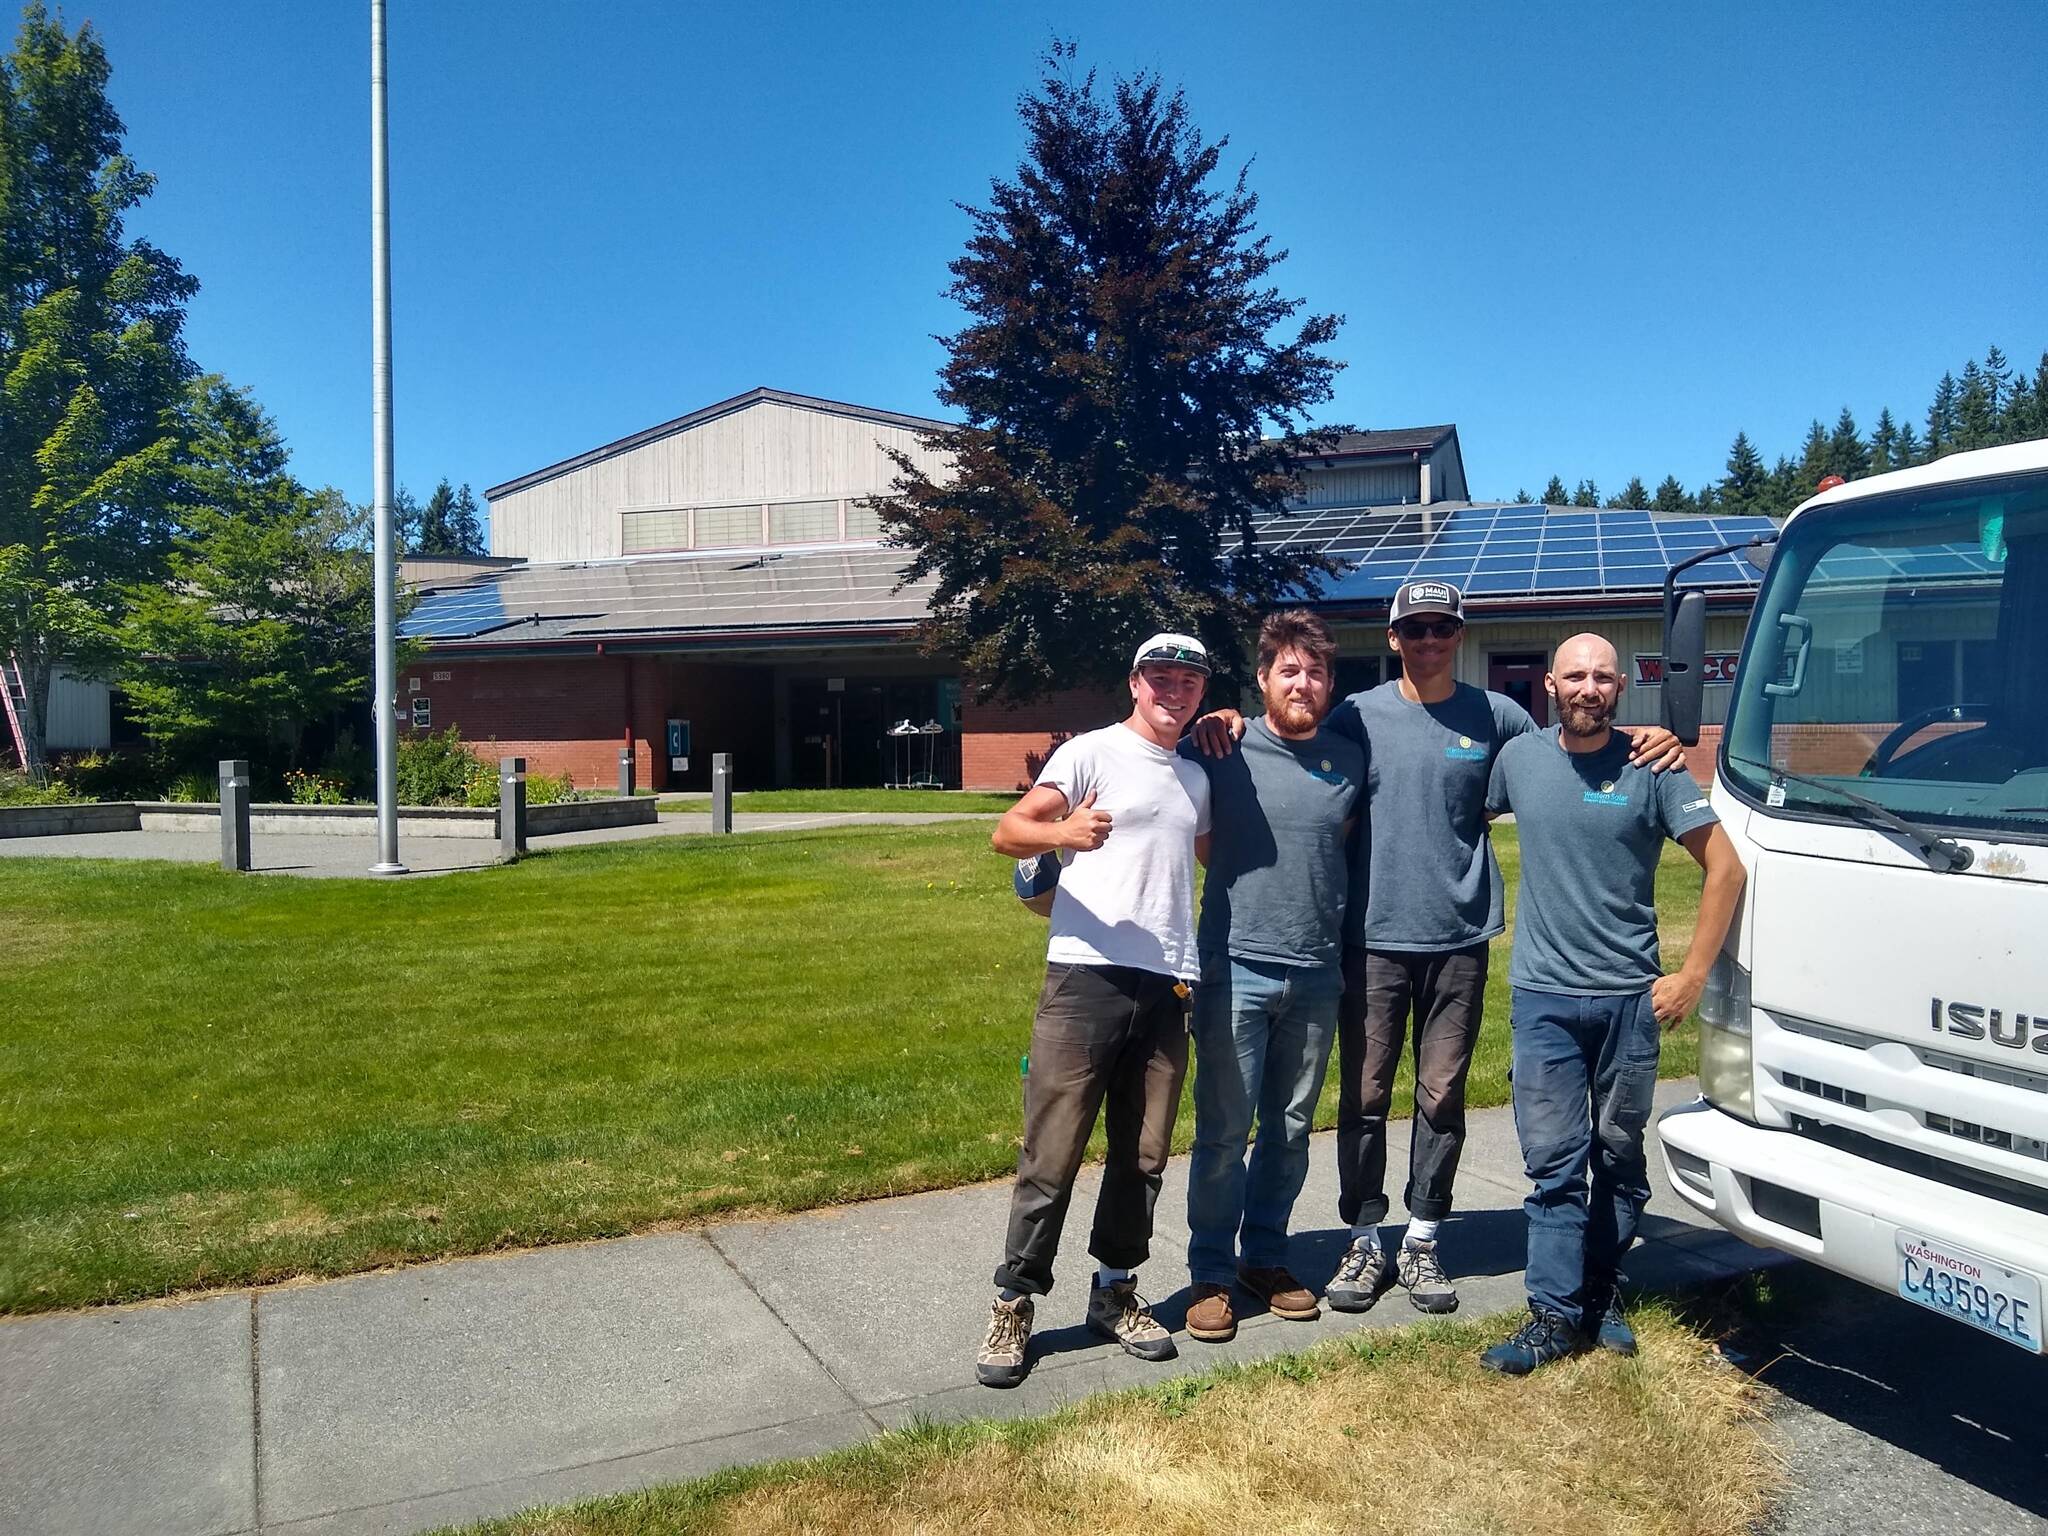 Photo submitted
Four installers pose at the South Whidbey Elementary School.